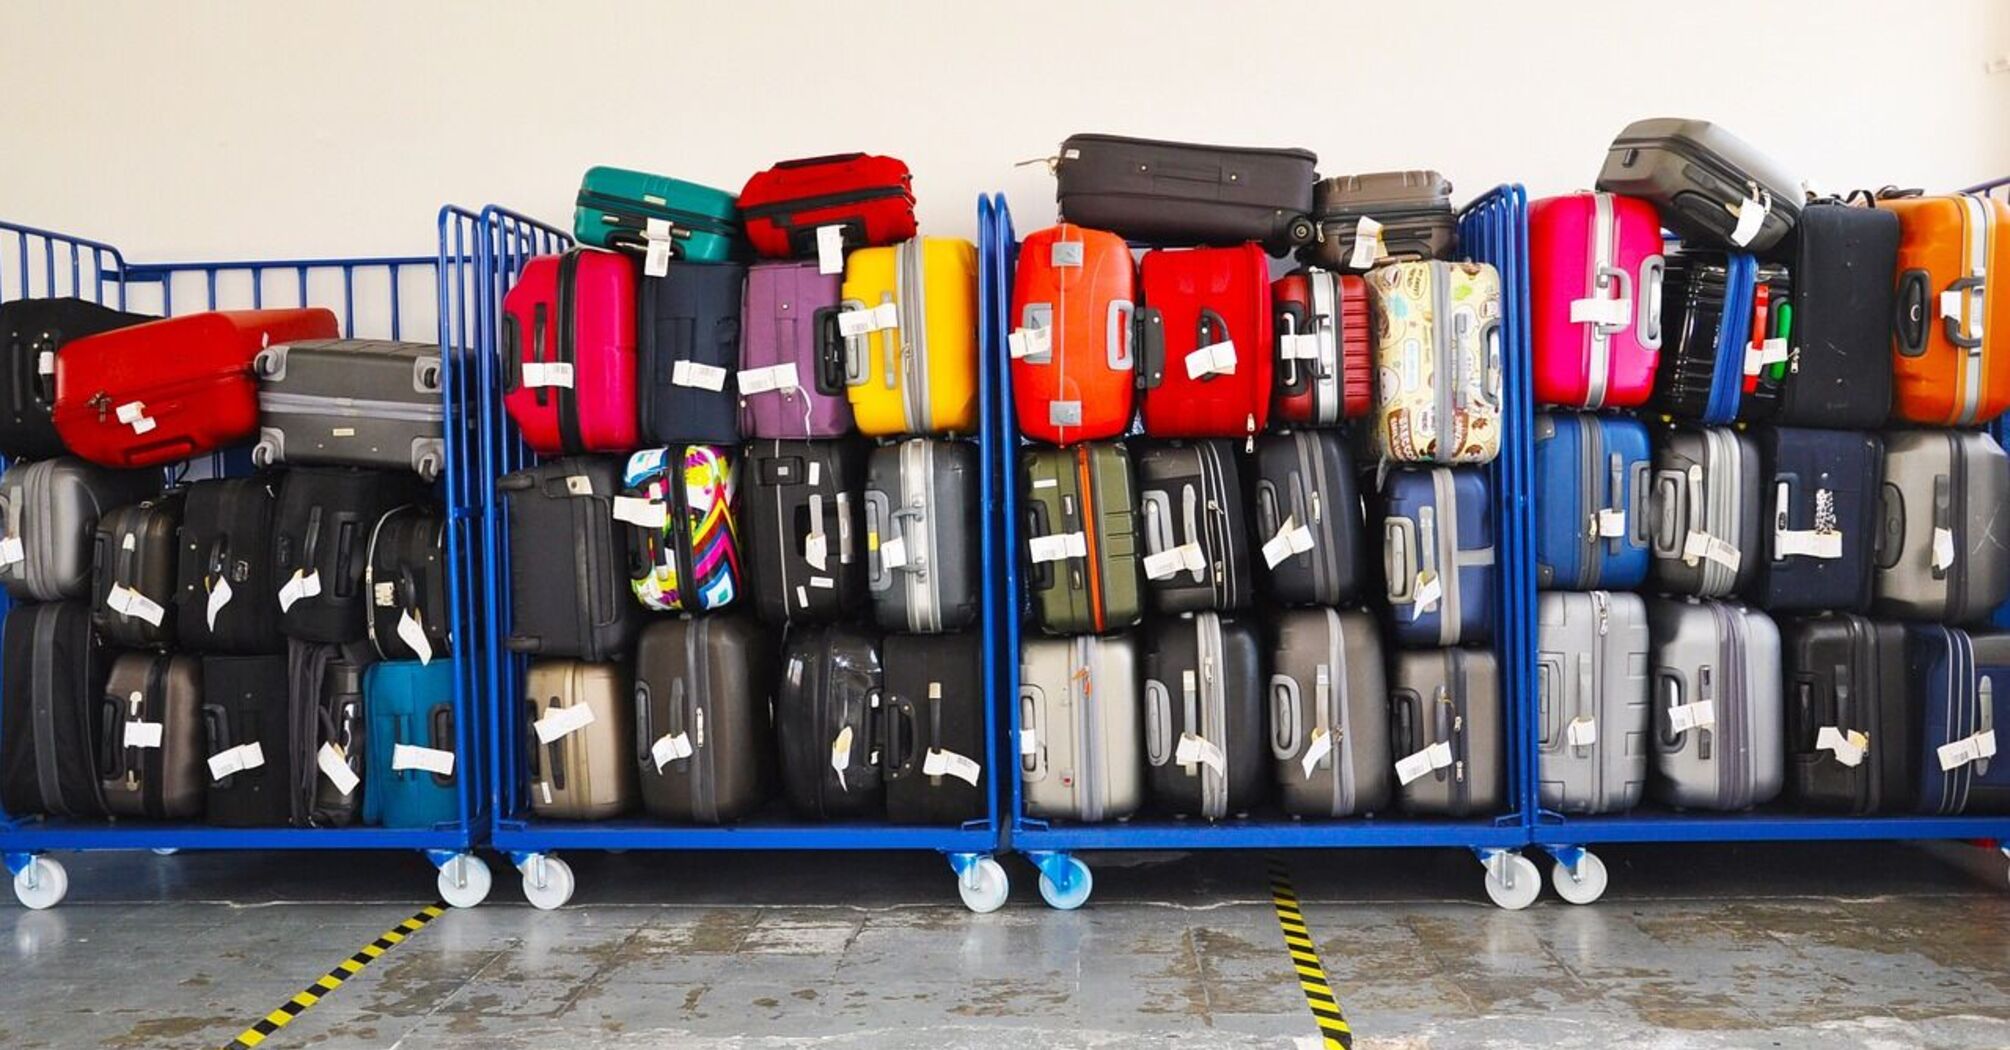 Another airline has increased the prices for checked baggage